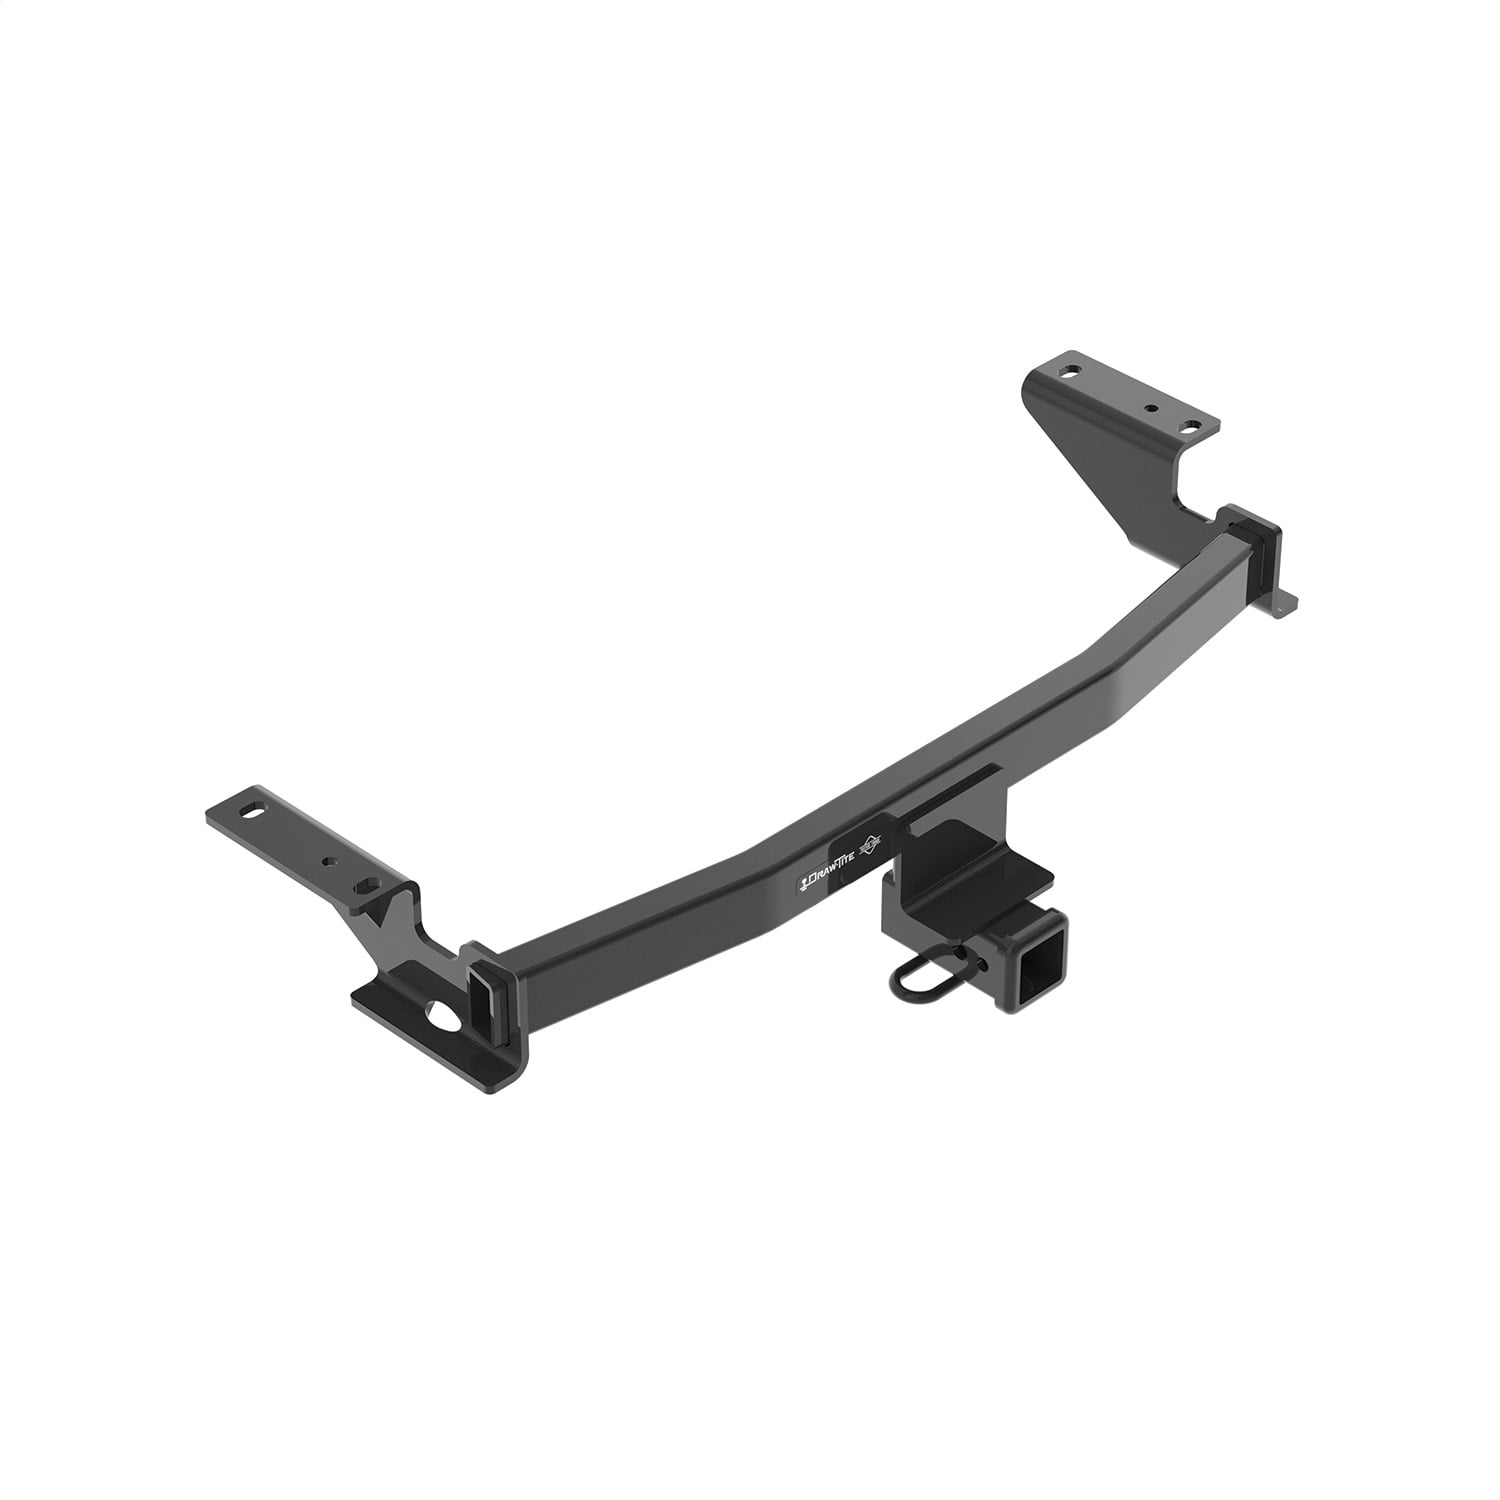 Draw-Tite 76192 Class III Max-Frame Trailer Hitch with 2 Receiver Tube Opening 